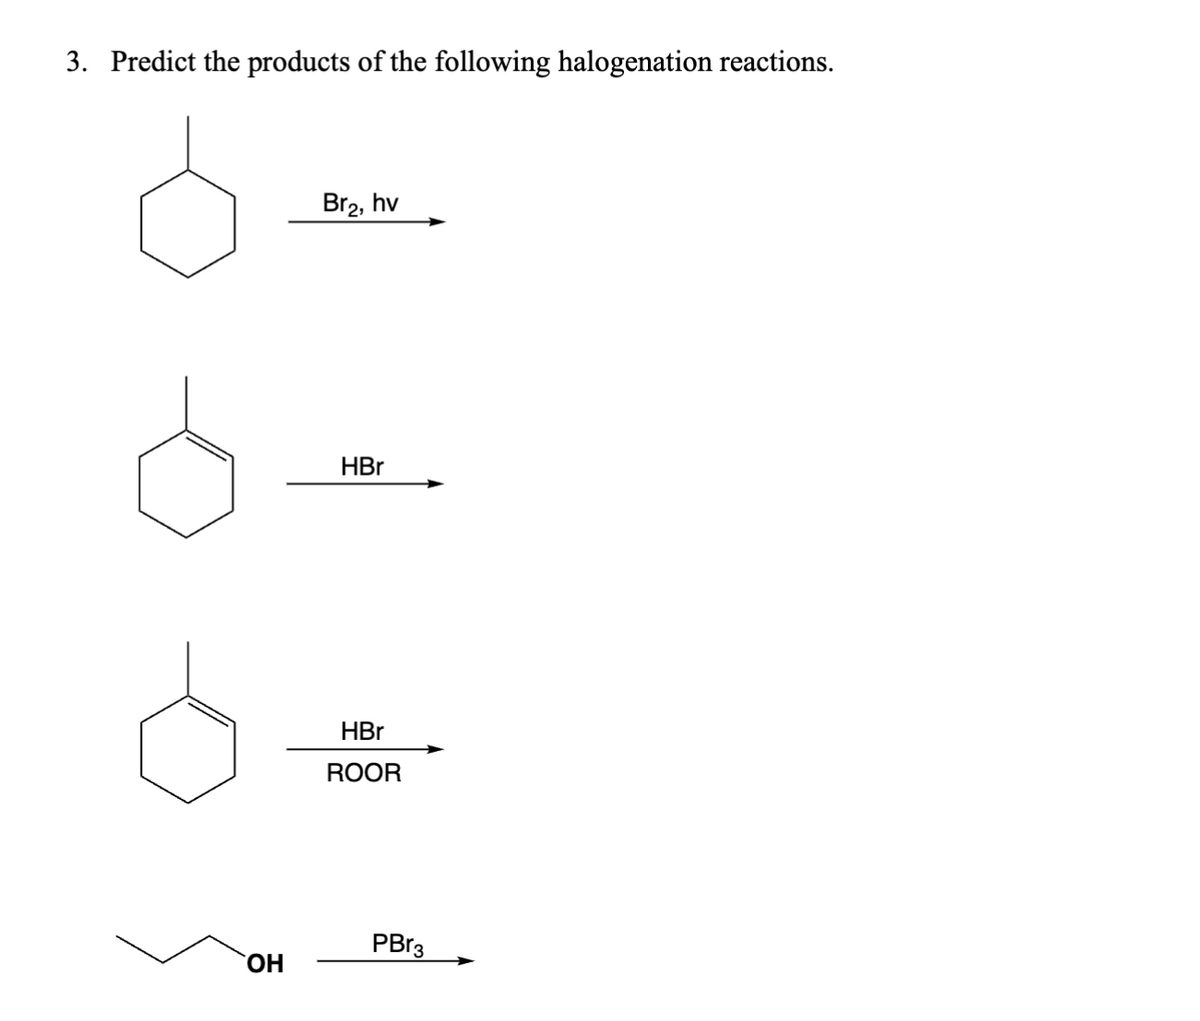 3. Predict the products of the following halogenation reactions.
OH
Br₂, hv
HBr
HBr
ROOR
PBr3